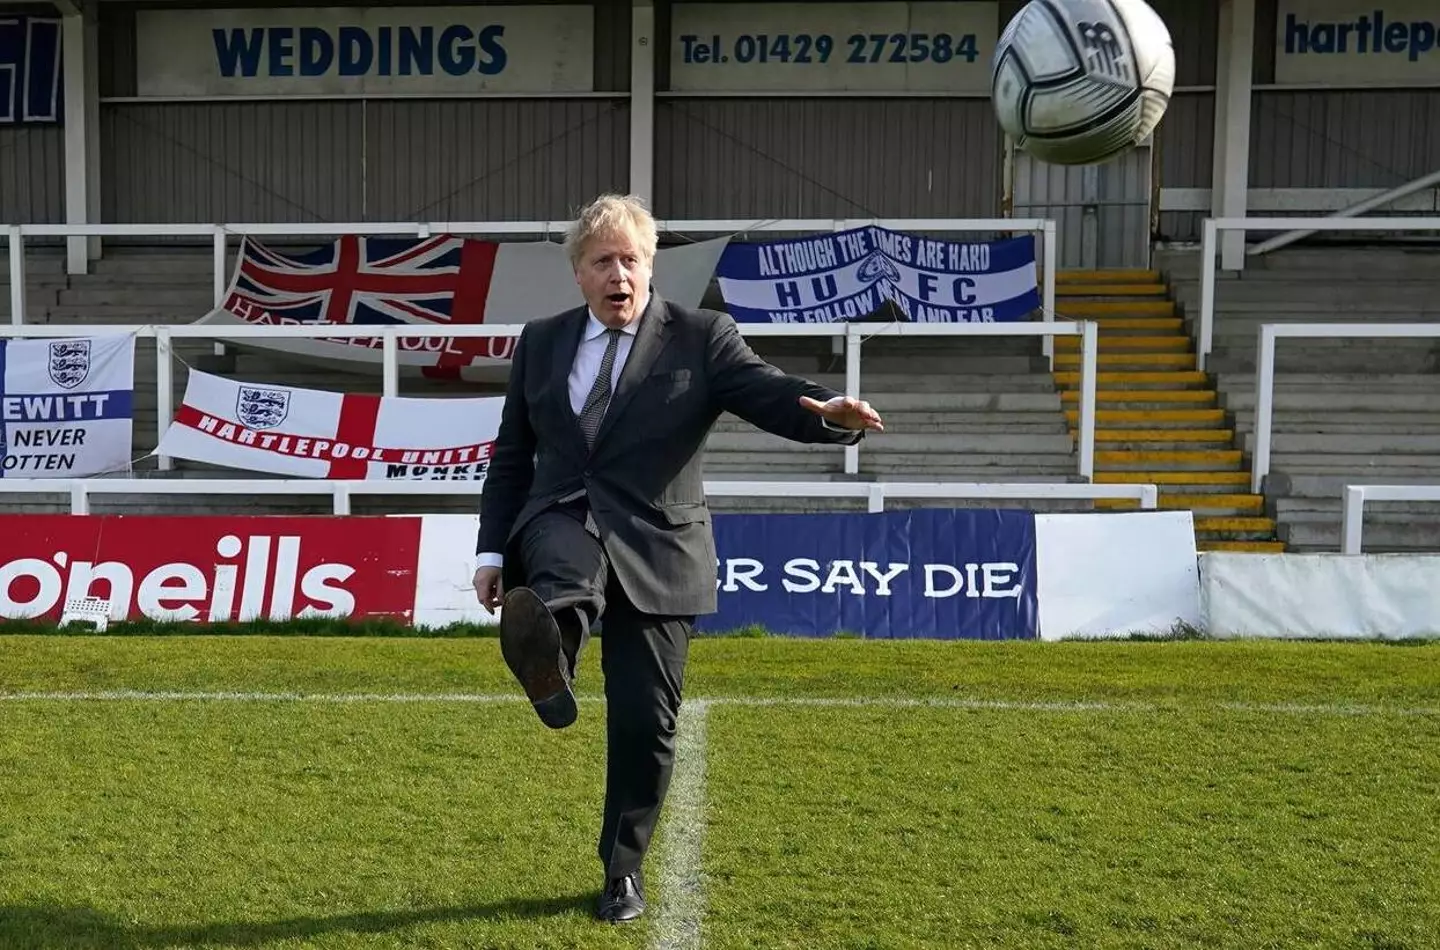 Prime Minister Boris Johnson echoed the statement made by Malthouse.